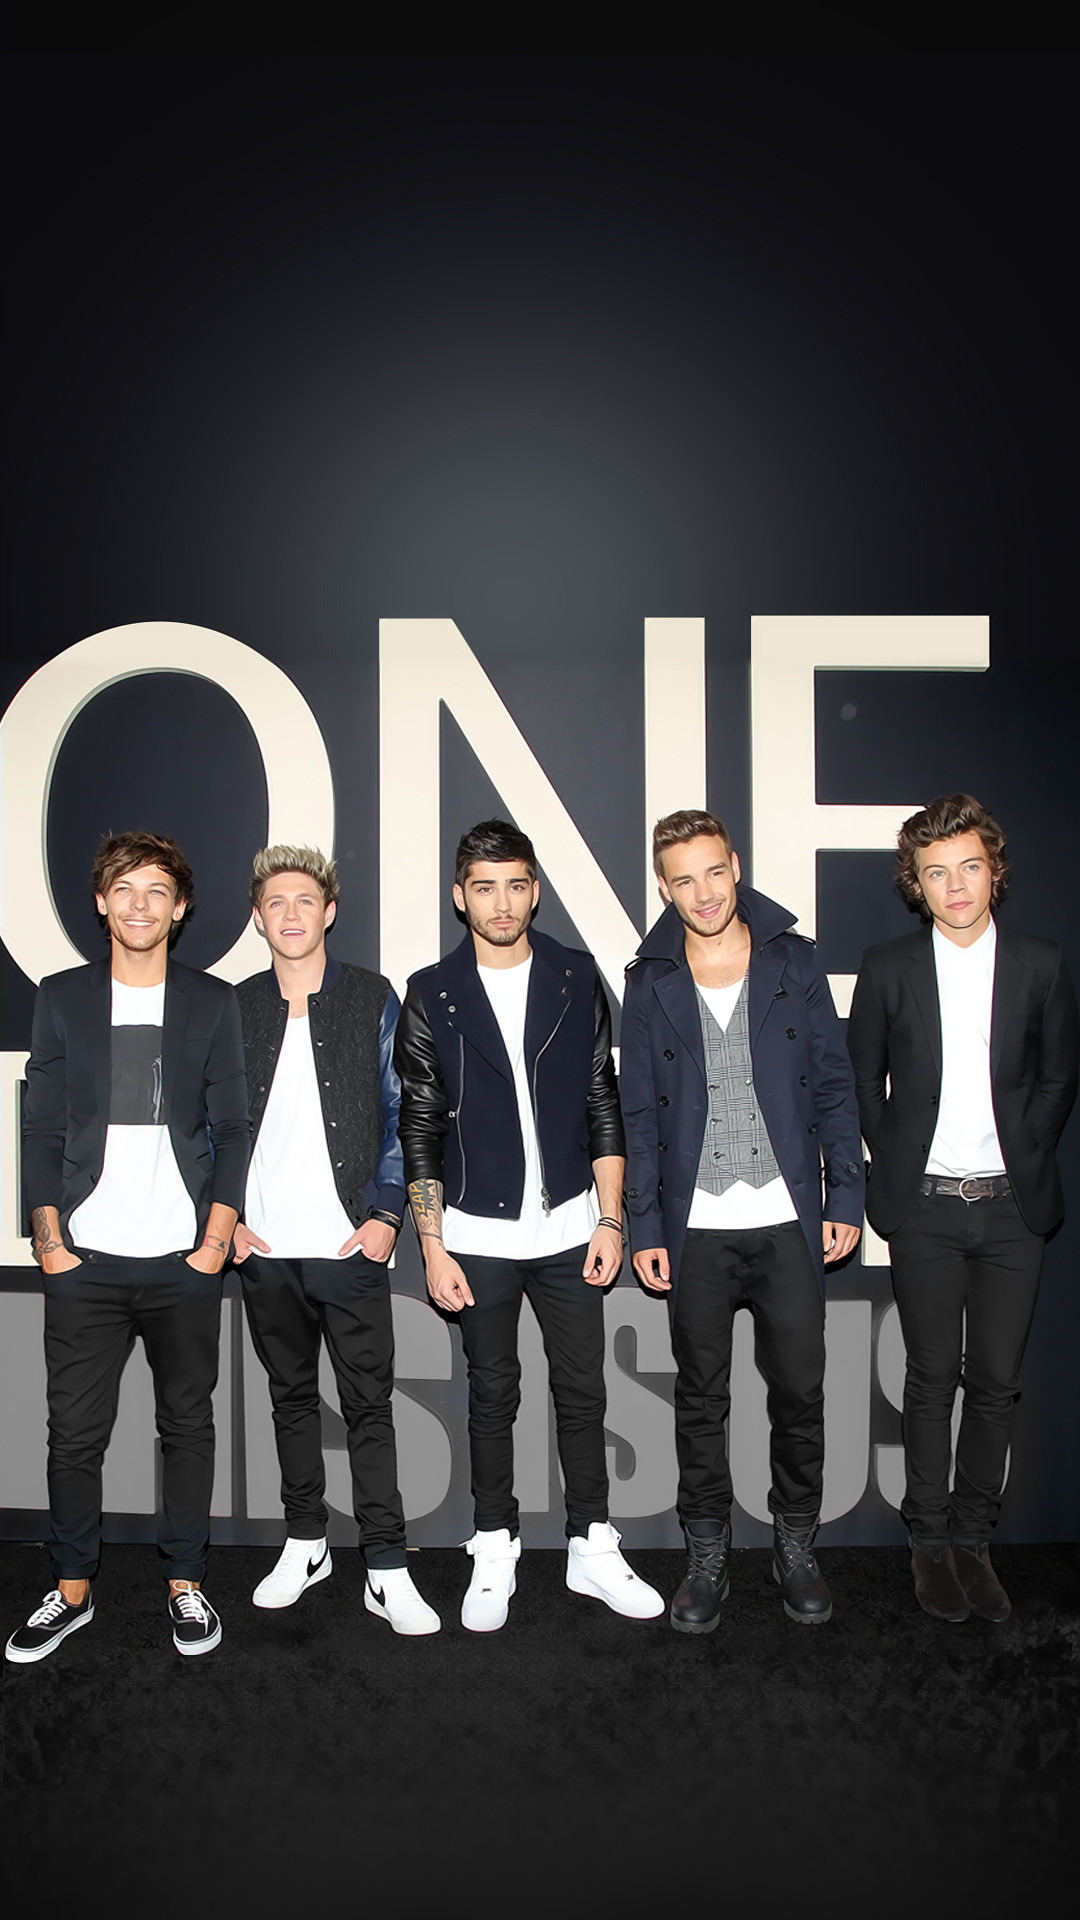 1080x1920 One Direction wallpaper for mobile phones ... - One Direction .